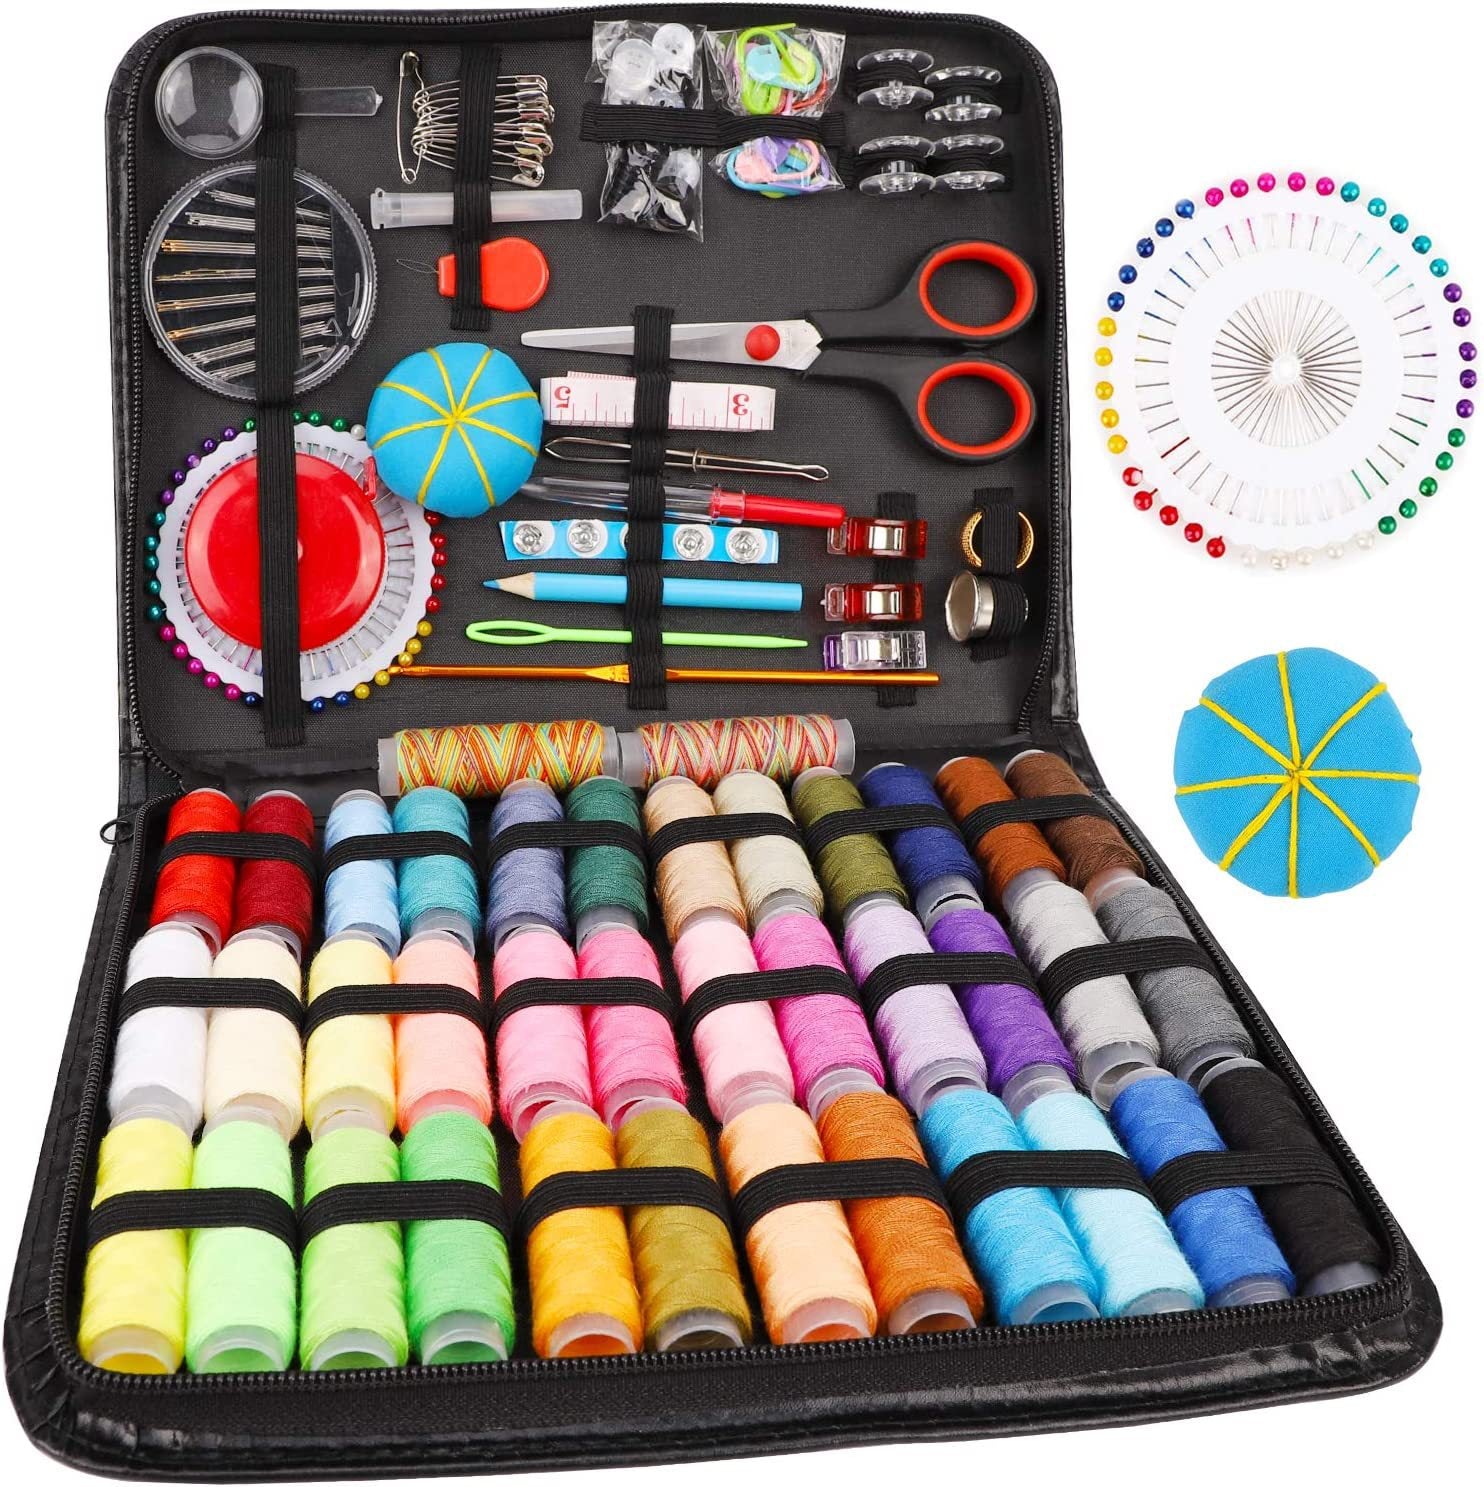 184pcs Portable Sewing Kit Gifts with Case for Grandma Mom Kids